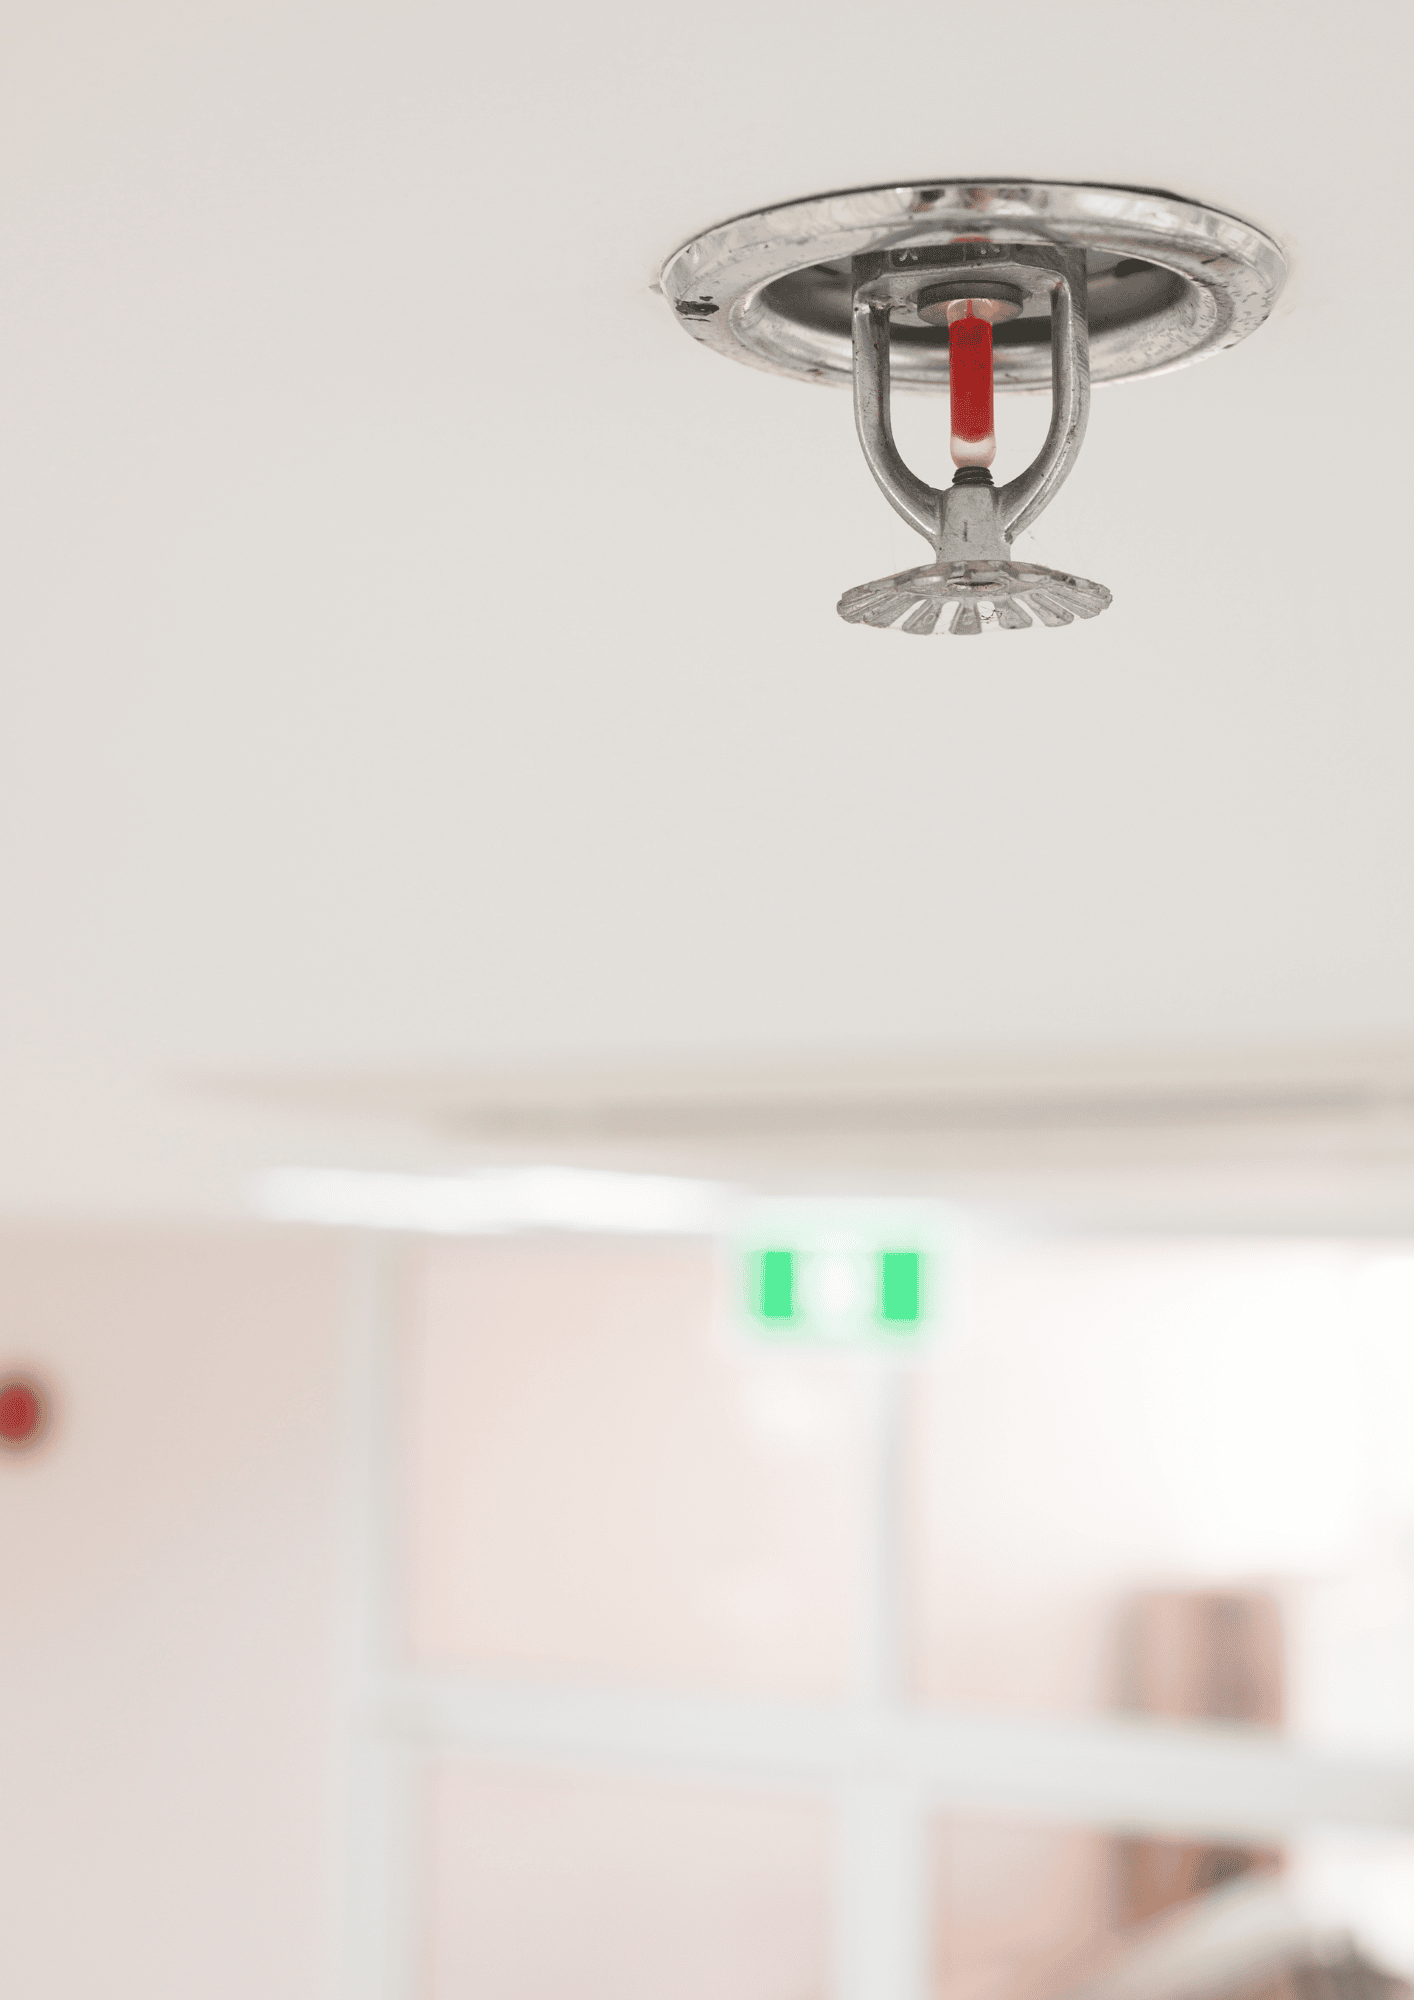 Sprinkler system in ceiling positioned right